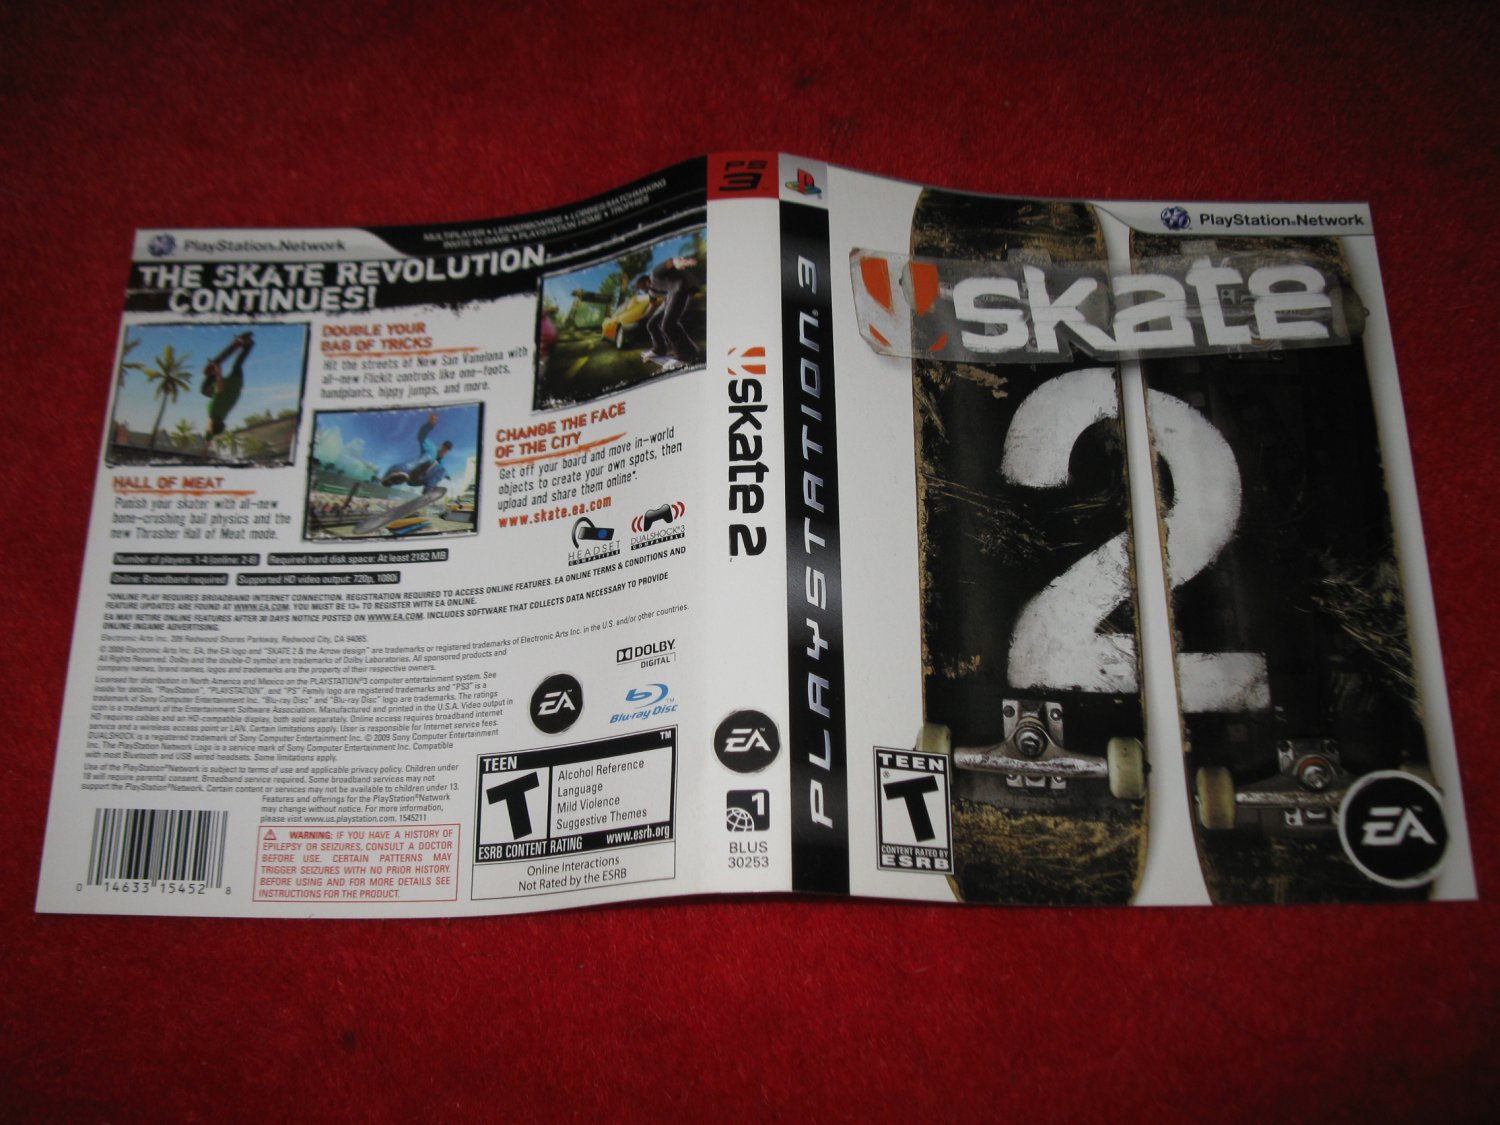 skate 2 ps3 for sale